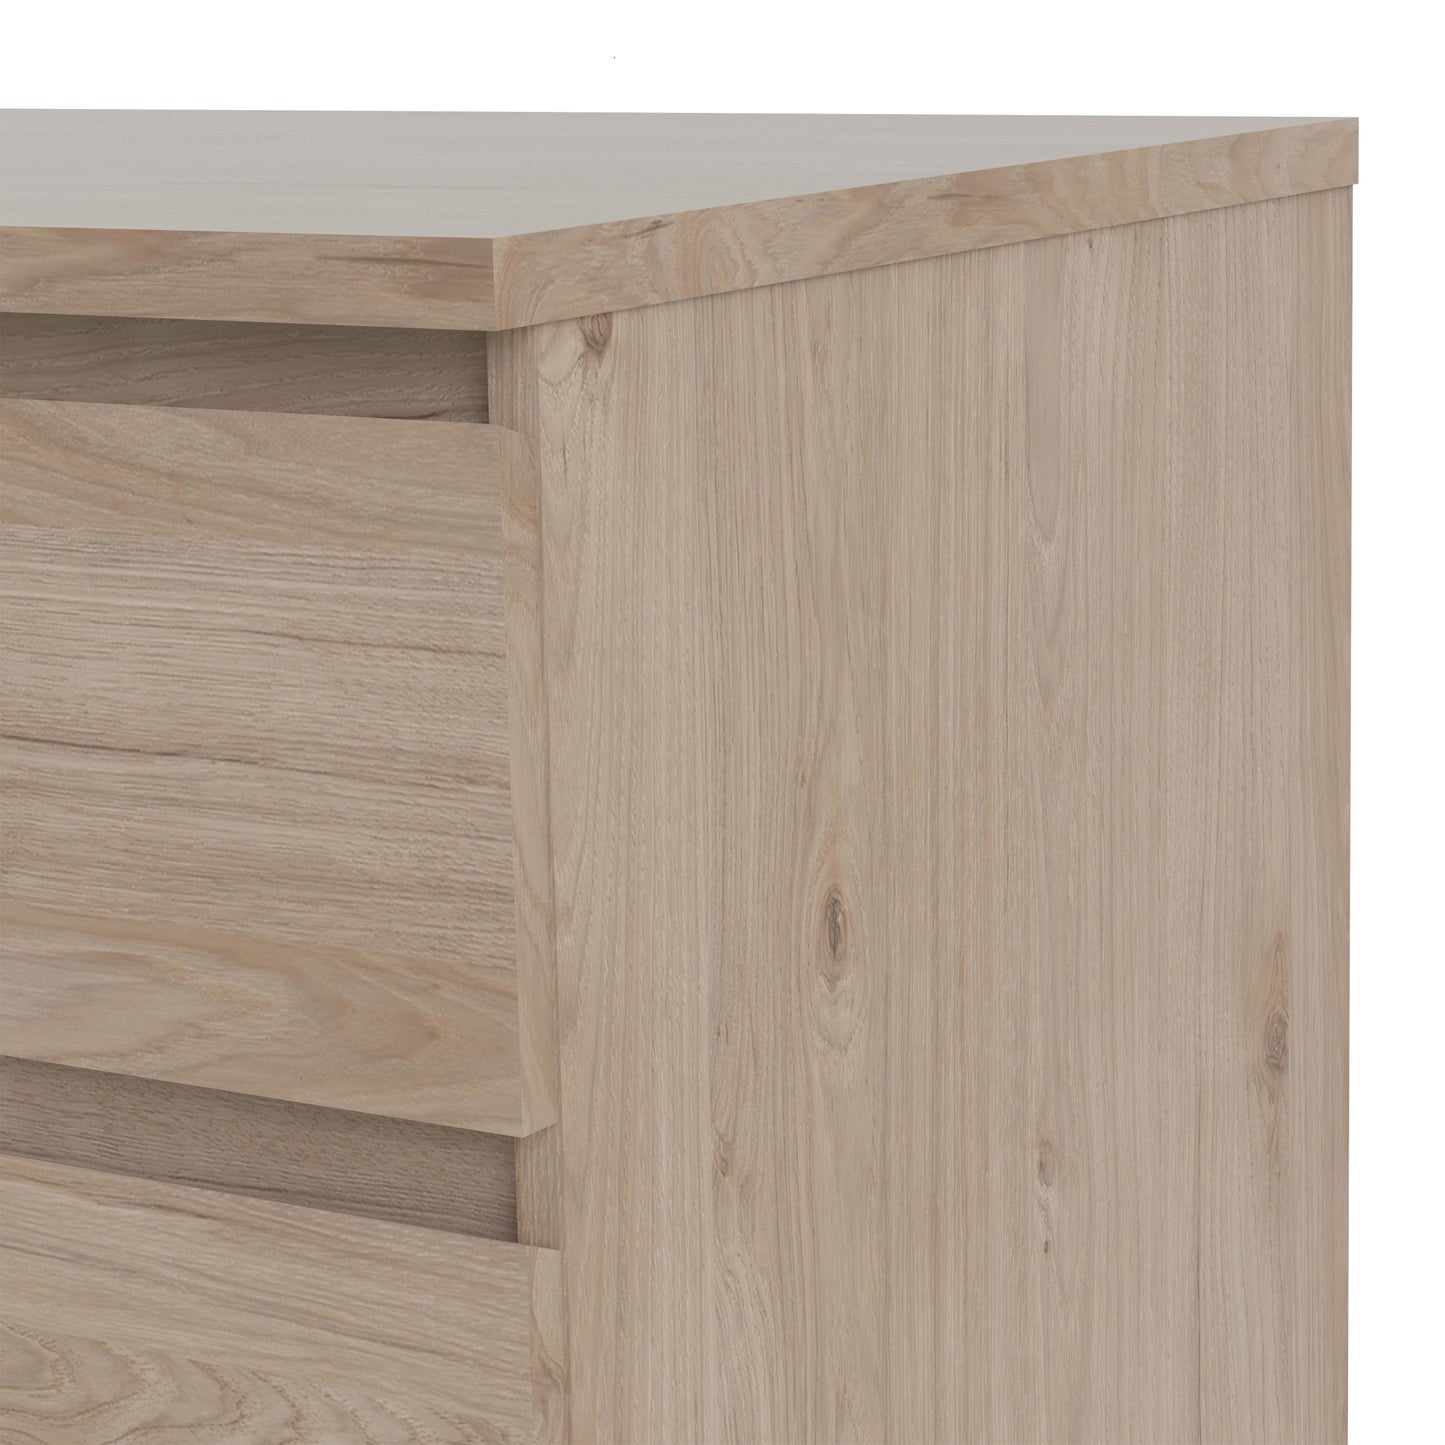 Naia  Chest of 5 Drawers in Jackson Hickory Oak